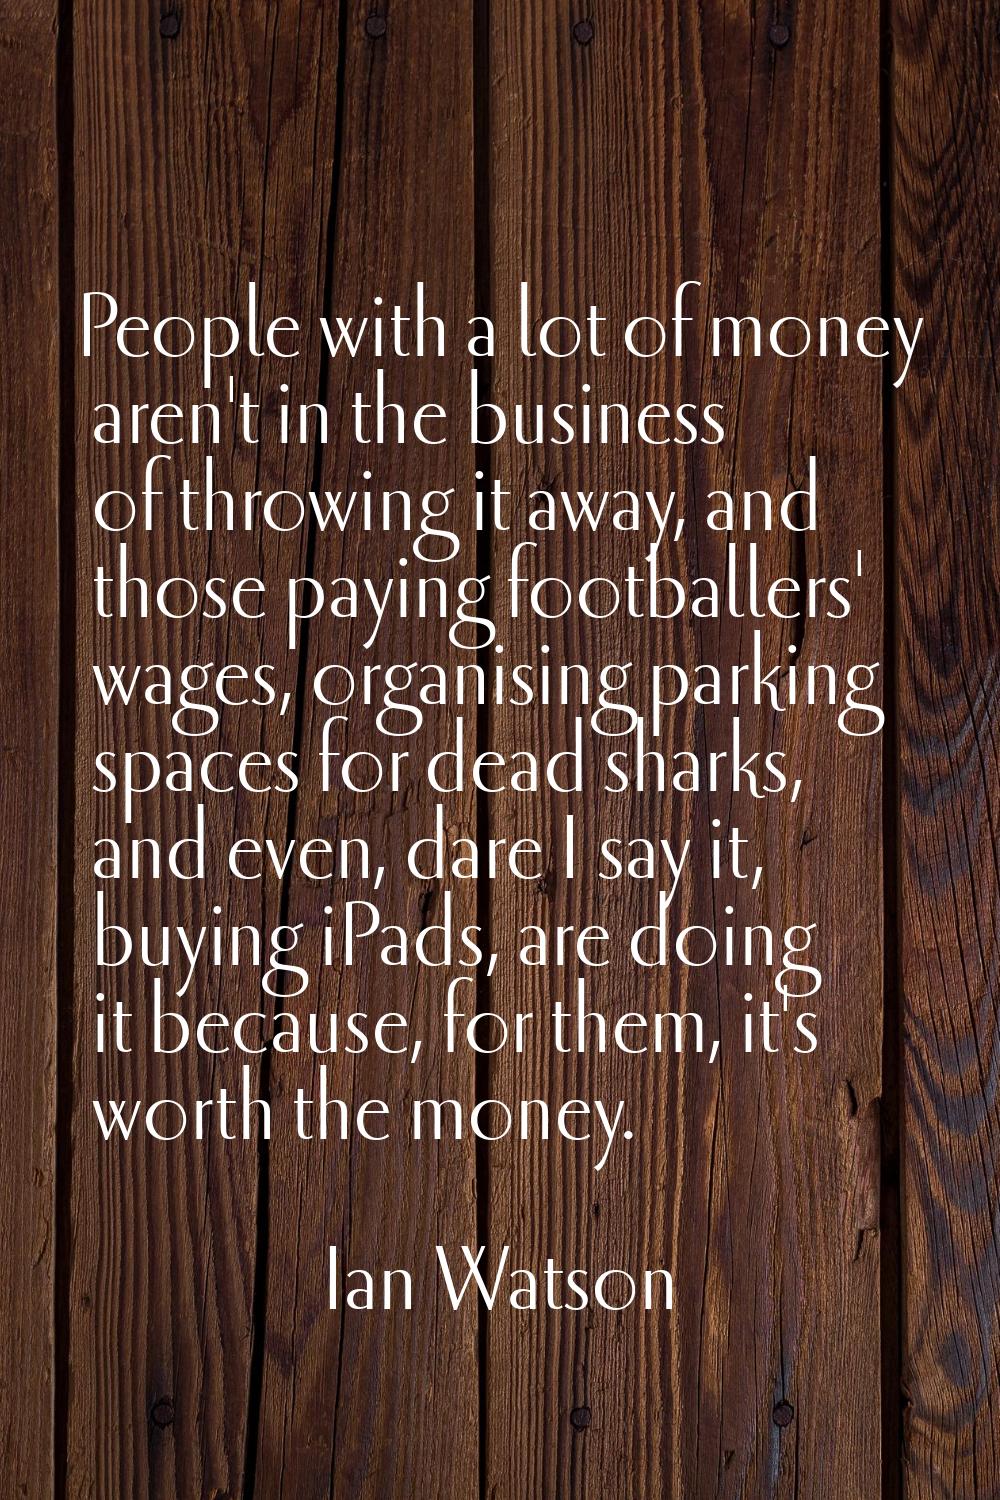 People with a lot of money aren't in the business of throwing it away, and those paying footballers